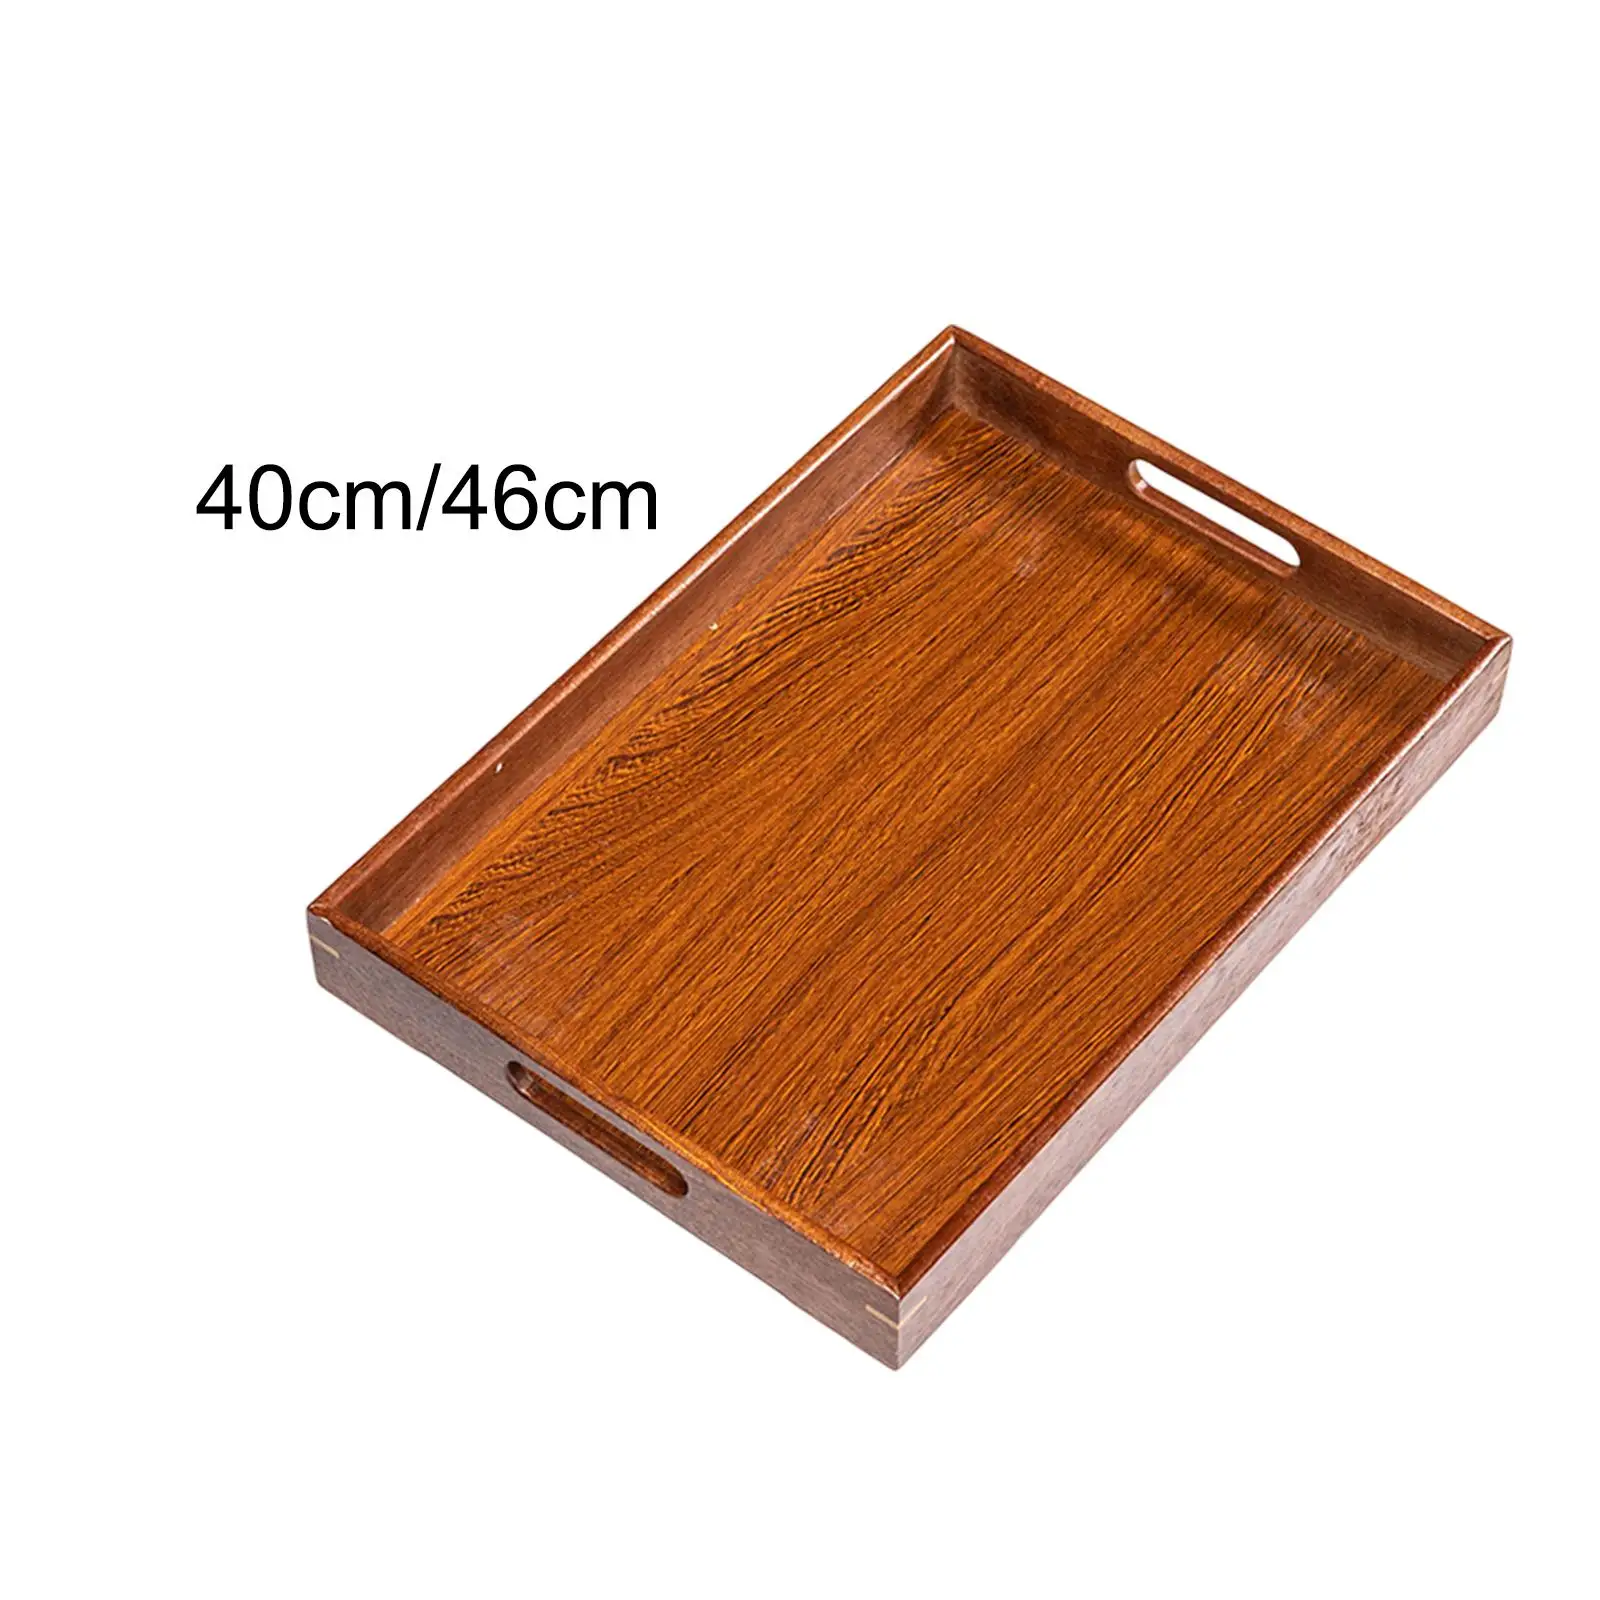 Serving Tray Wooden Serving Decorative Tray Serving Plate Dinner Trays